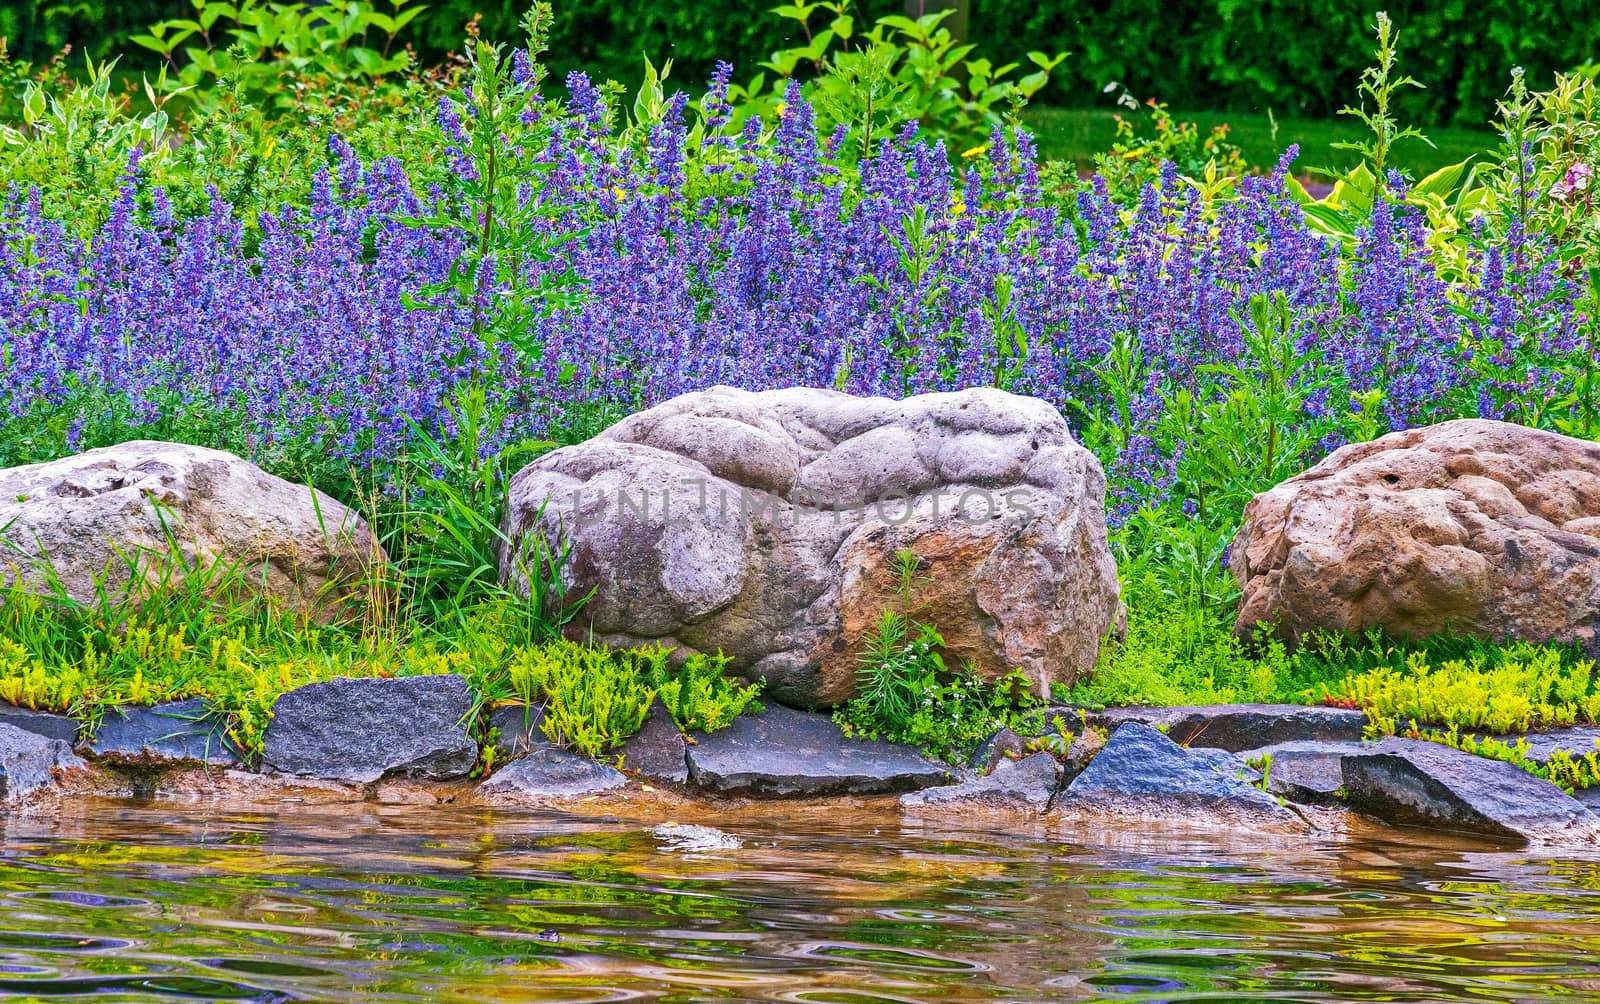 A small transparent river is washed by large stone boulders against the background of wild wildflowers